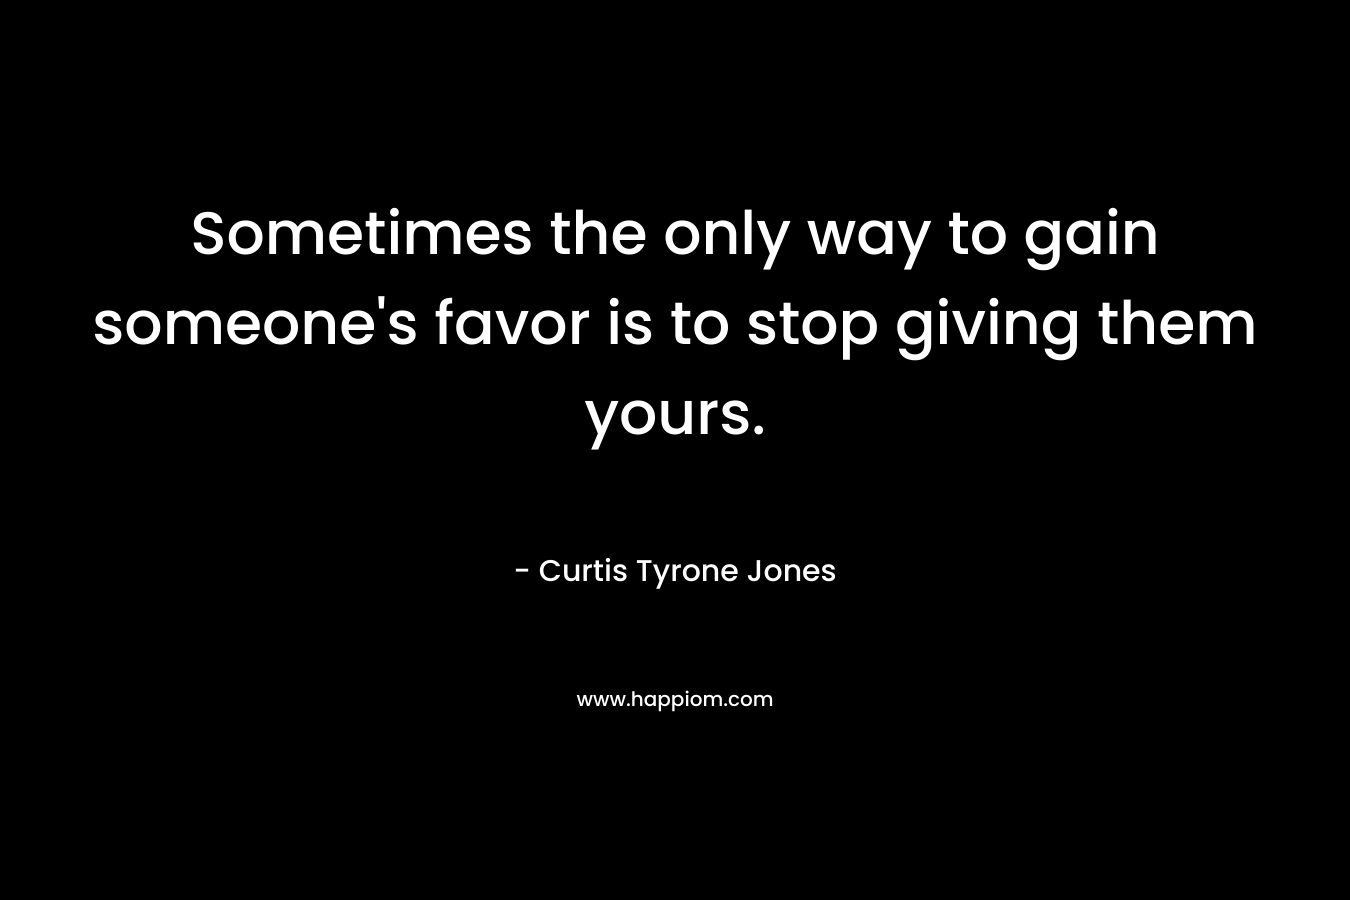 Sometimes the only way to gain someone's favor is to stop giving them yours.